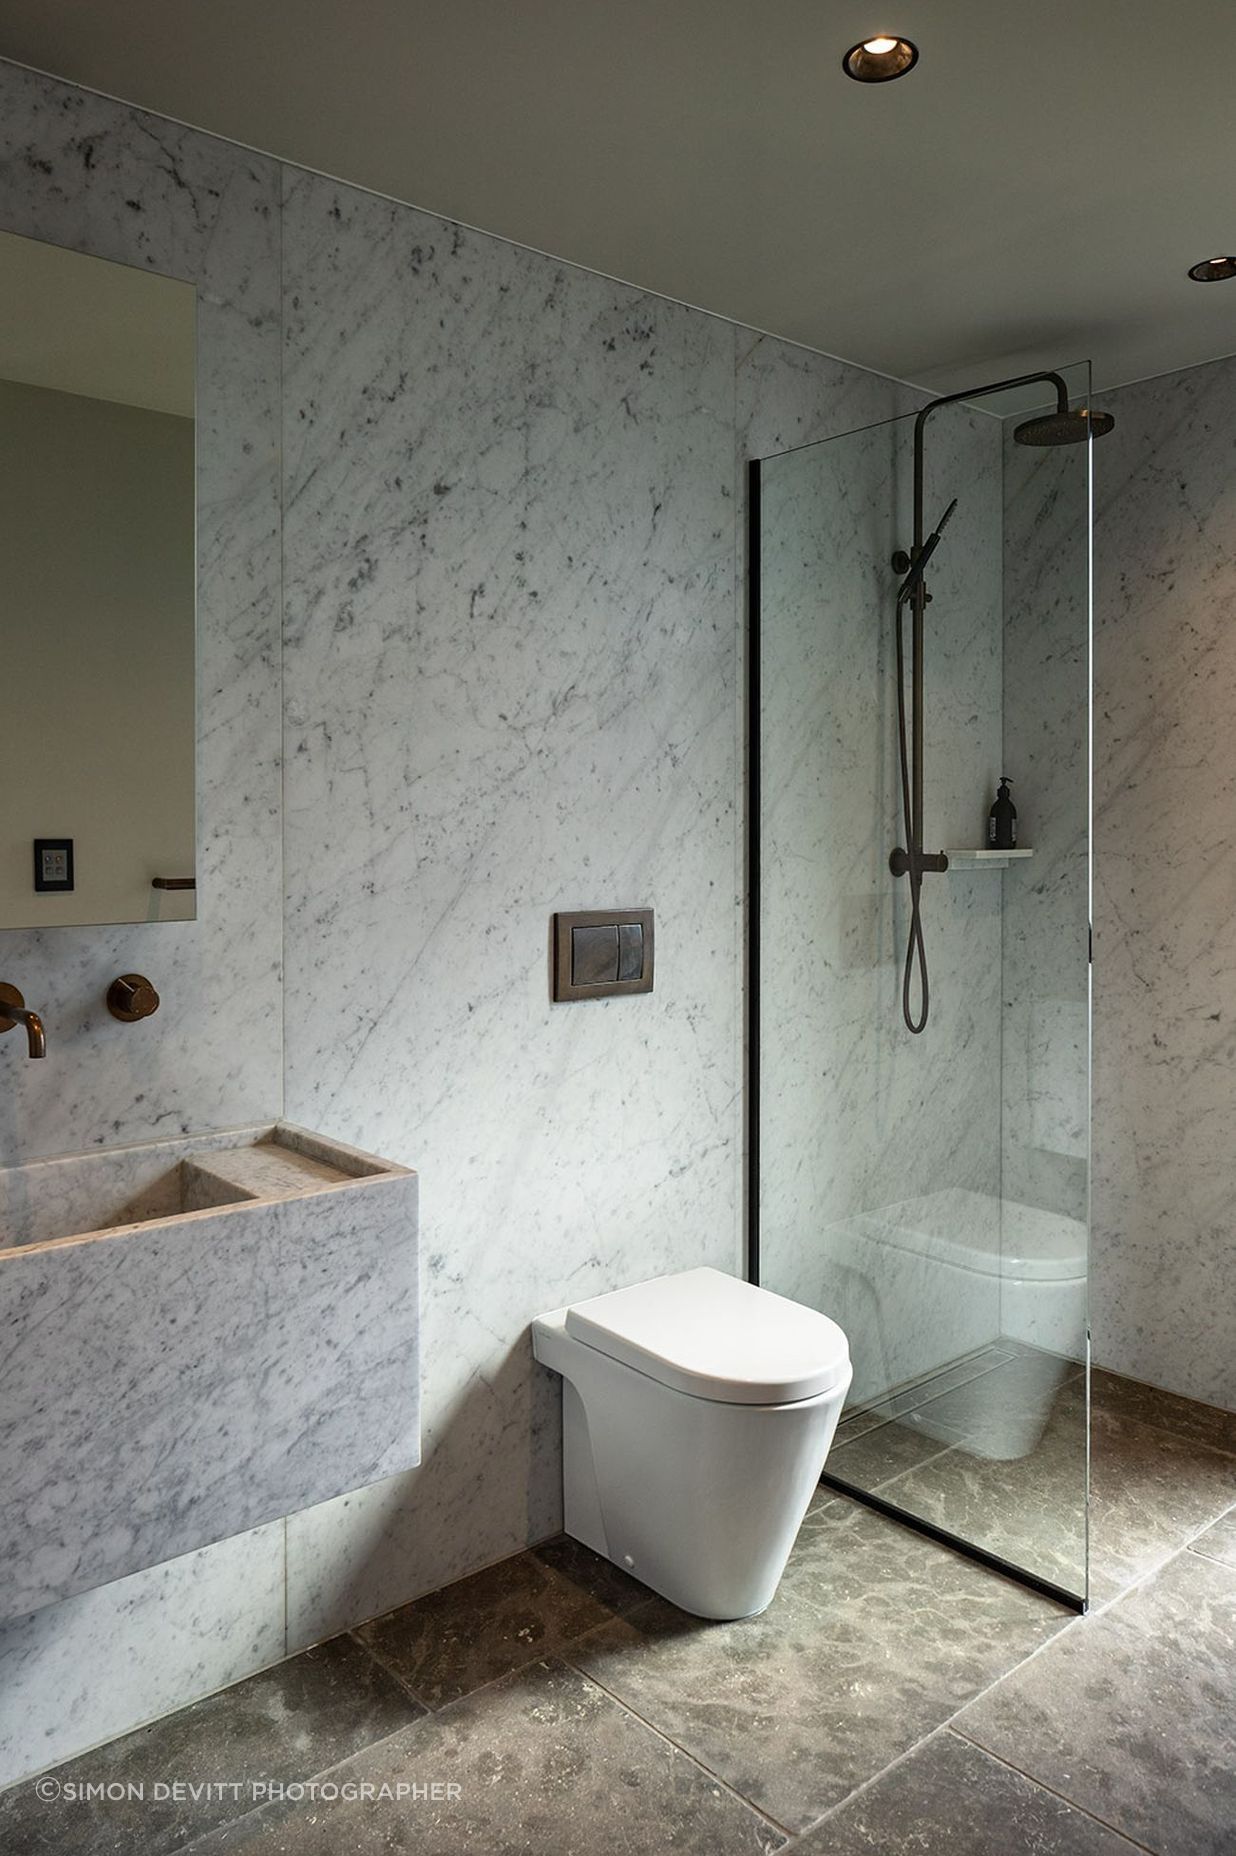 Marble-clad walls and floors combine with sculptured wall-hung basins in the bathrooms.